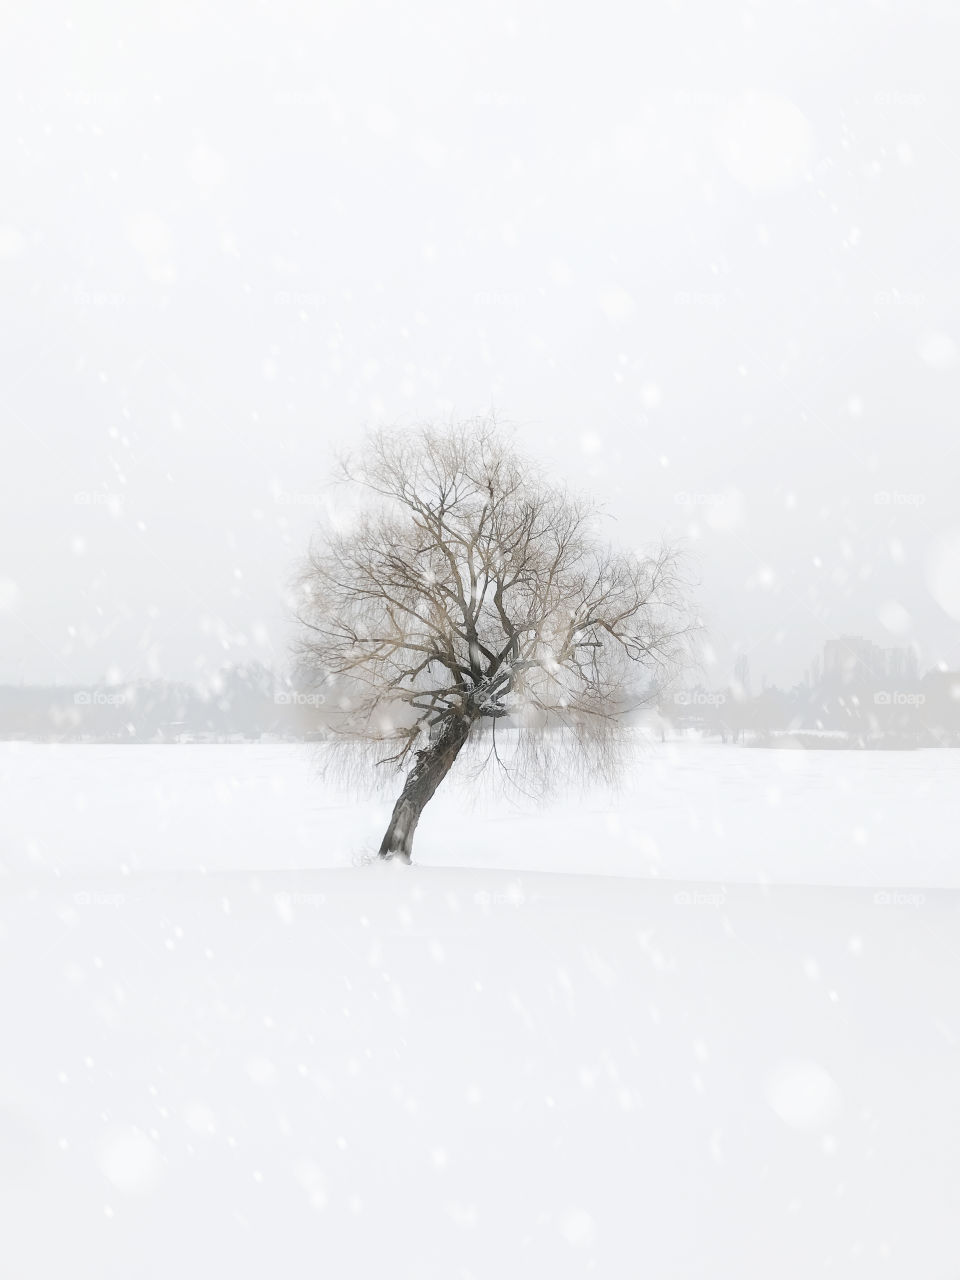 Tree under the falling snow in winter in the field 